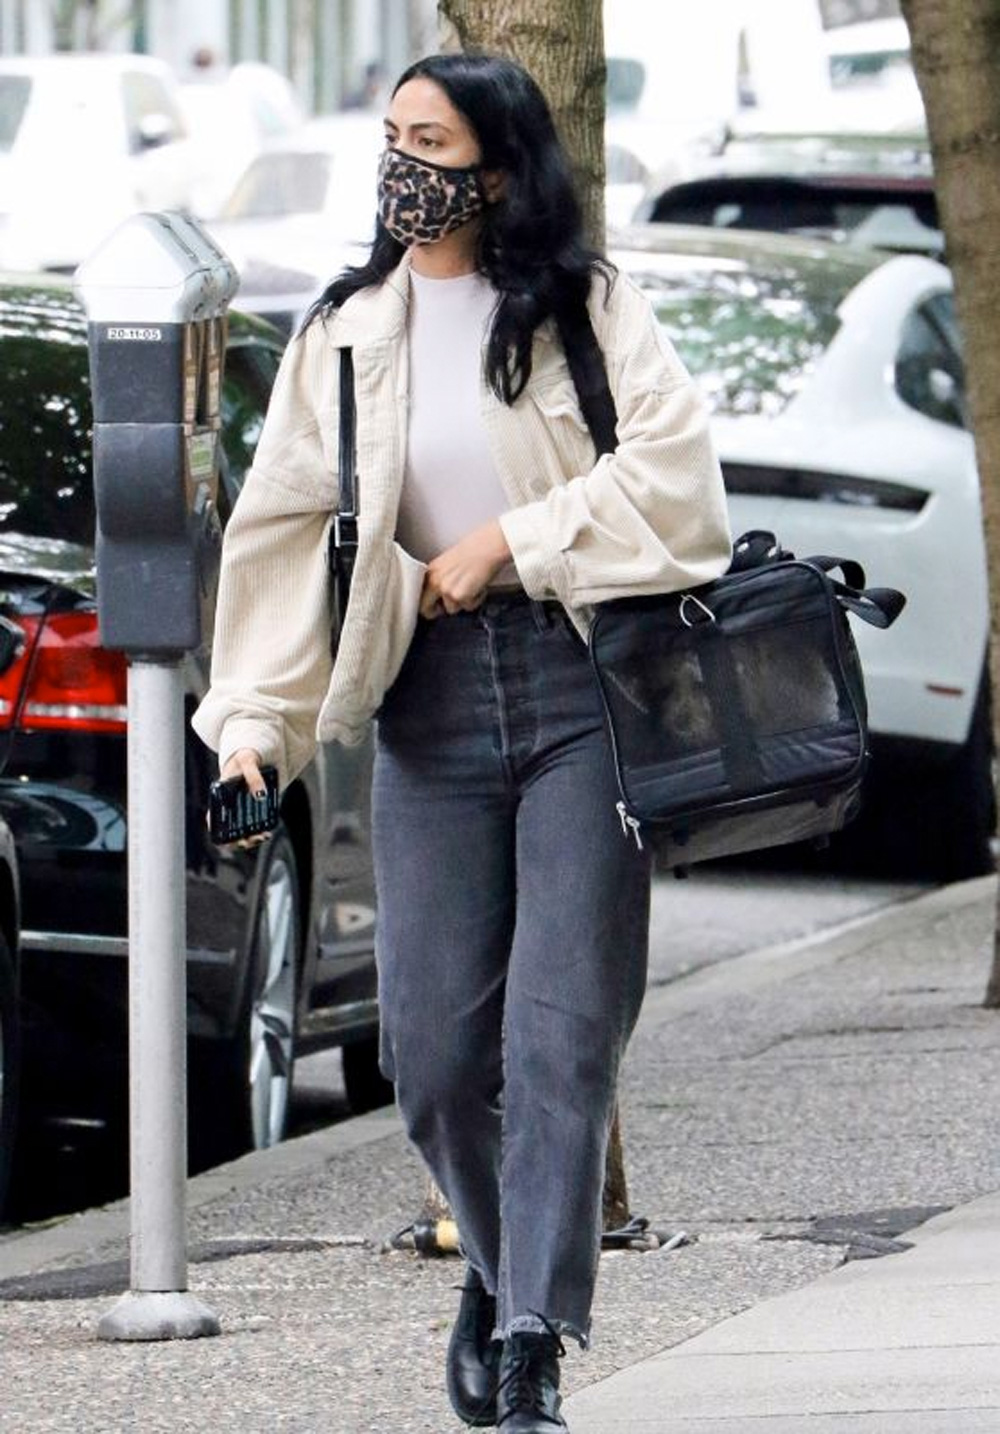 Camila Mendes in a chic denim outfit in Vancouver